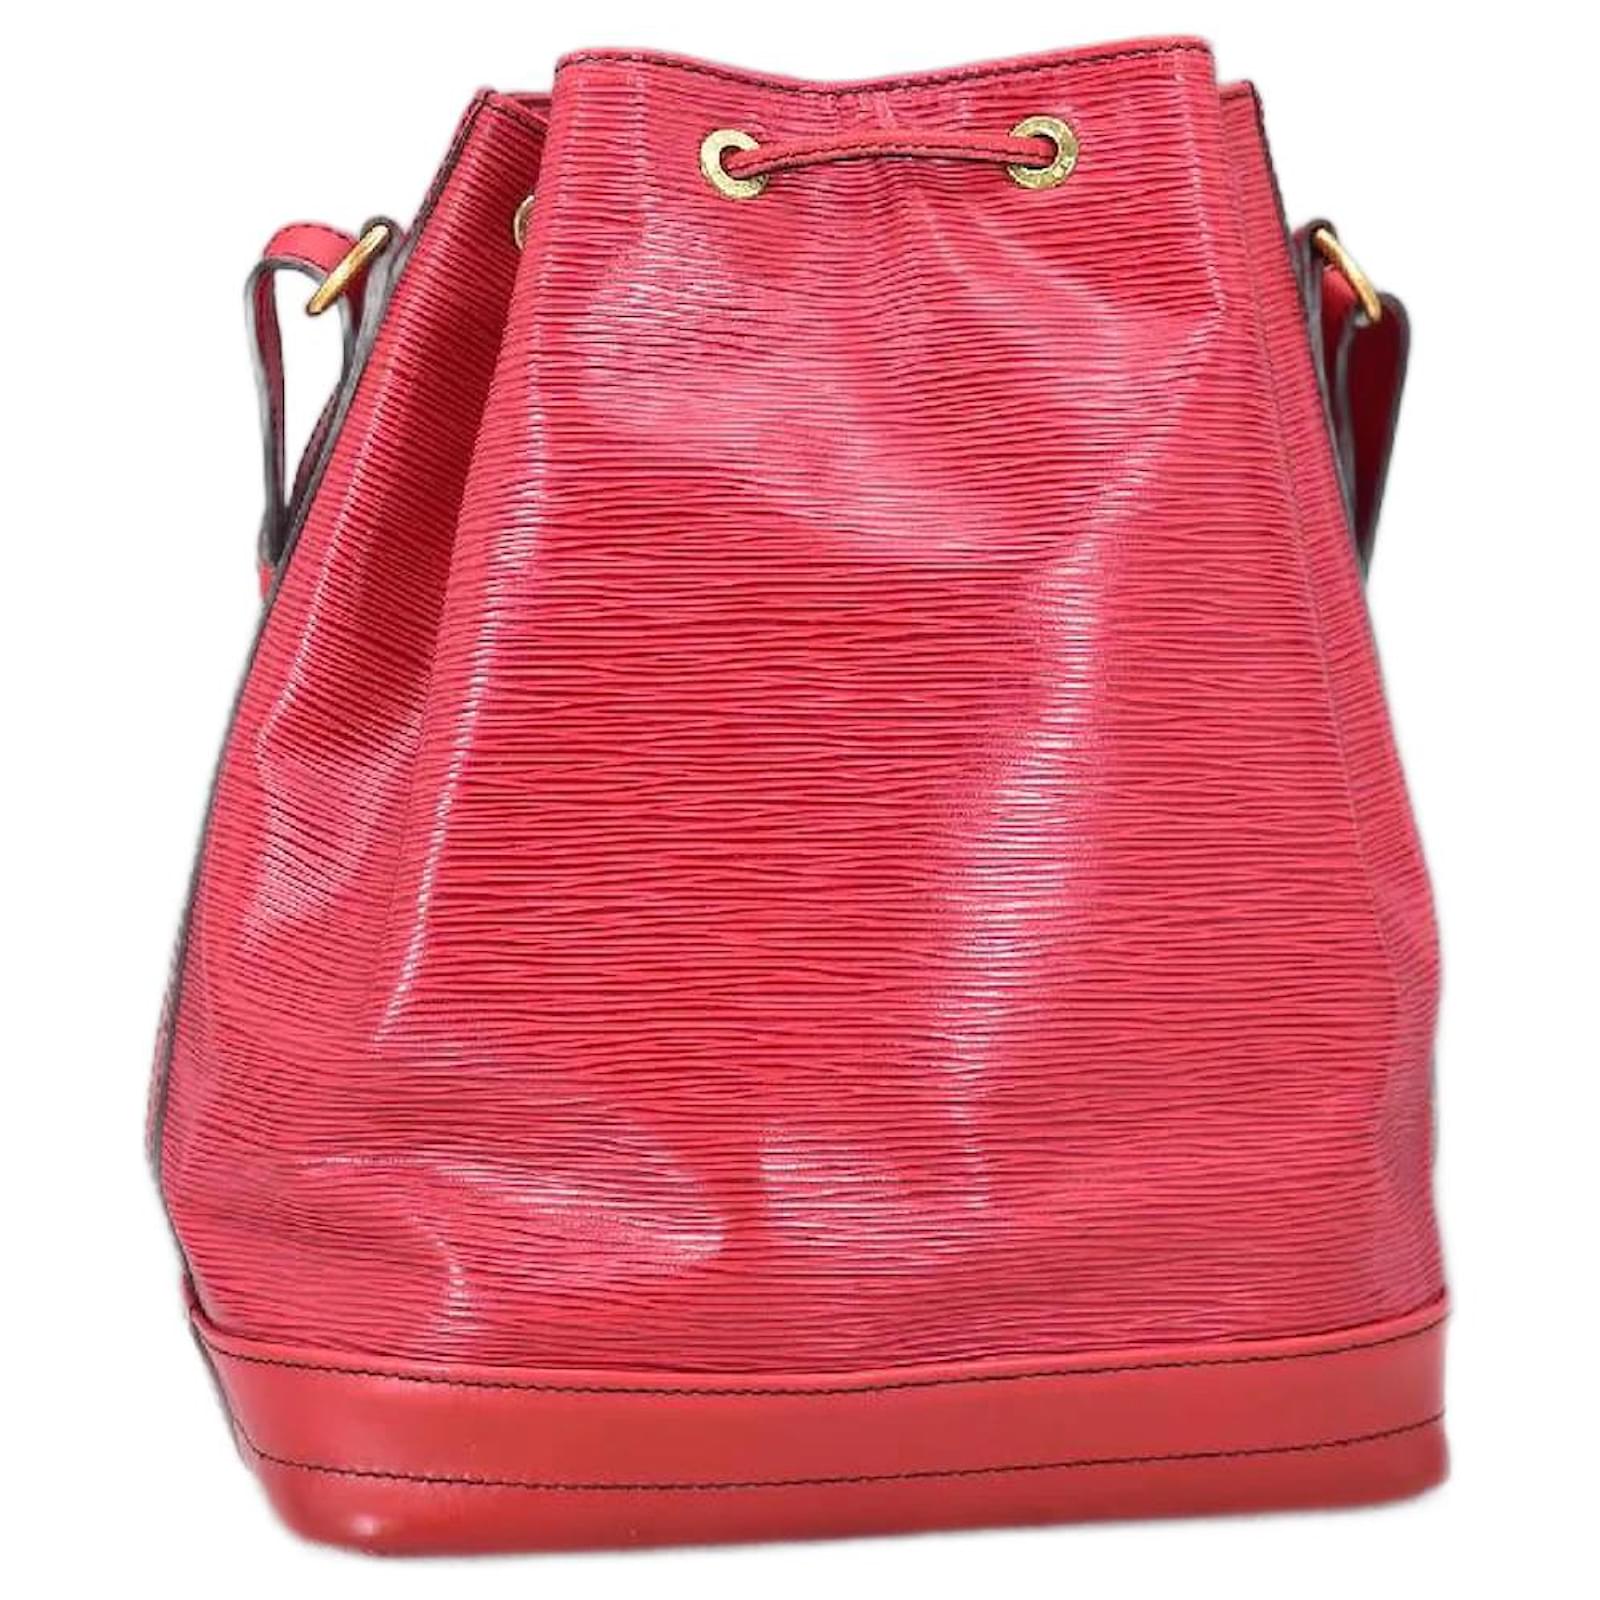 Louis Vuitton Epi Noe M44007 Red Leather Pony-style calfskin ref